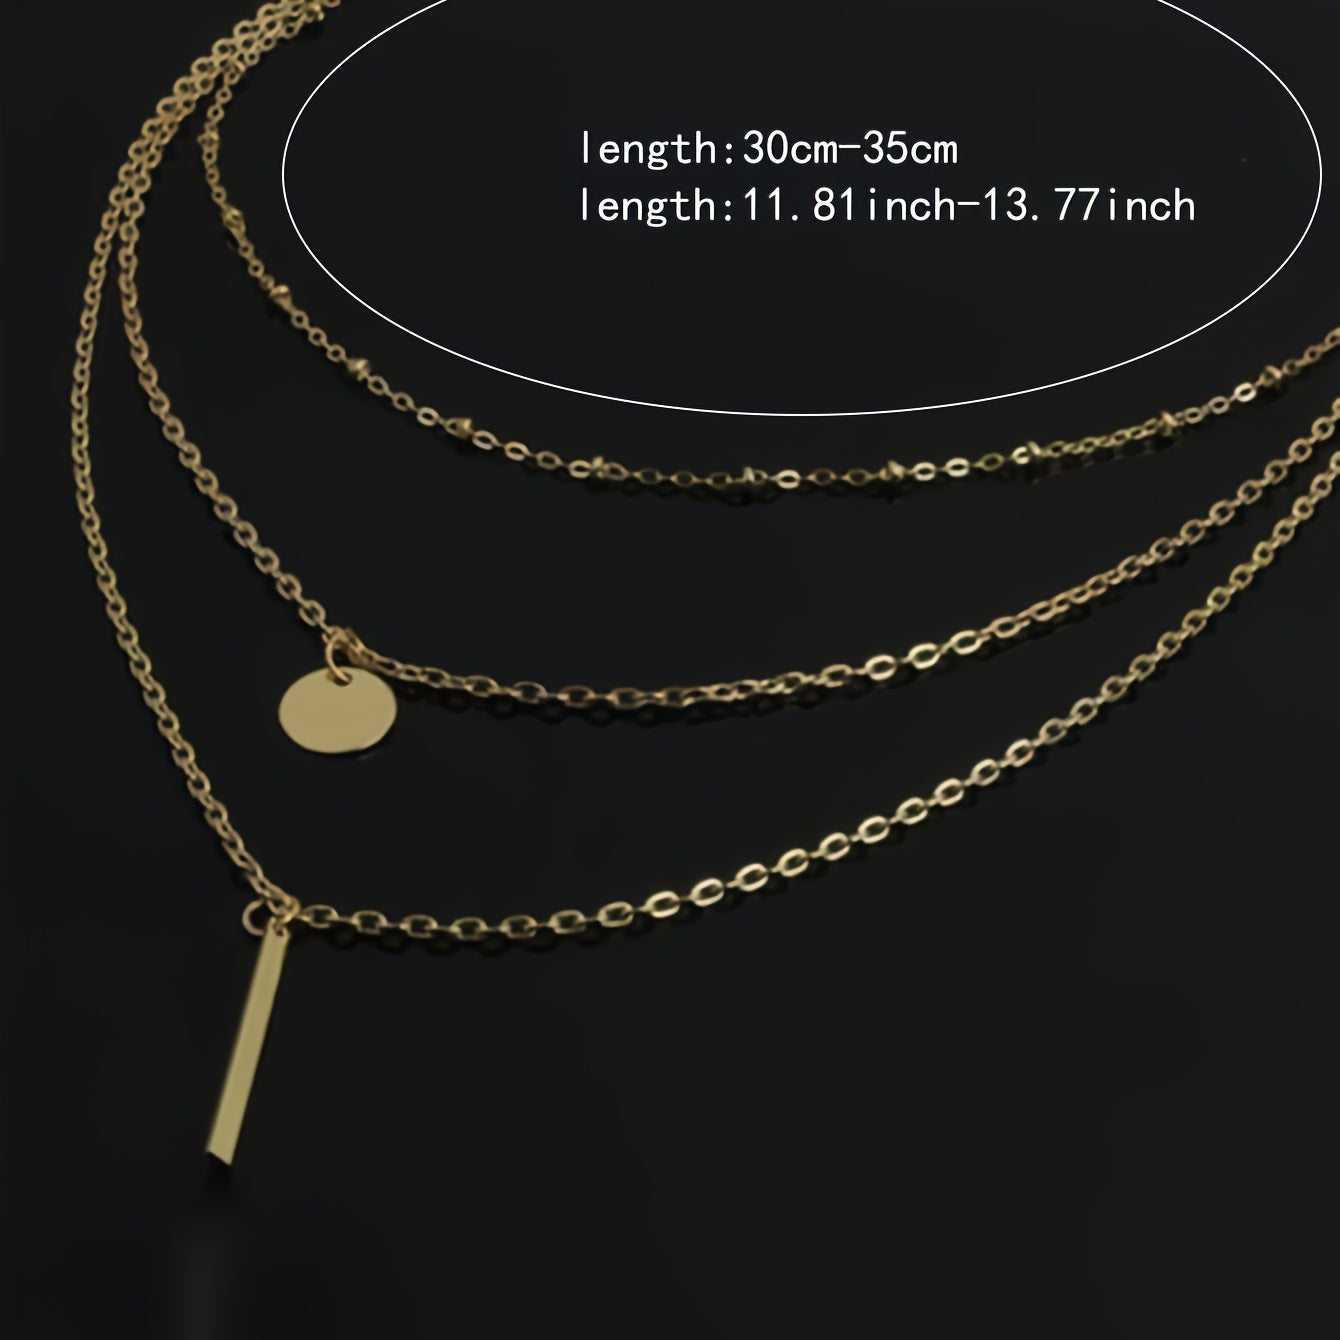 Luxurious multi-layer necklace